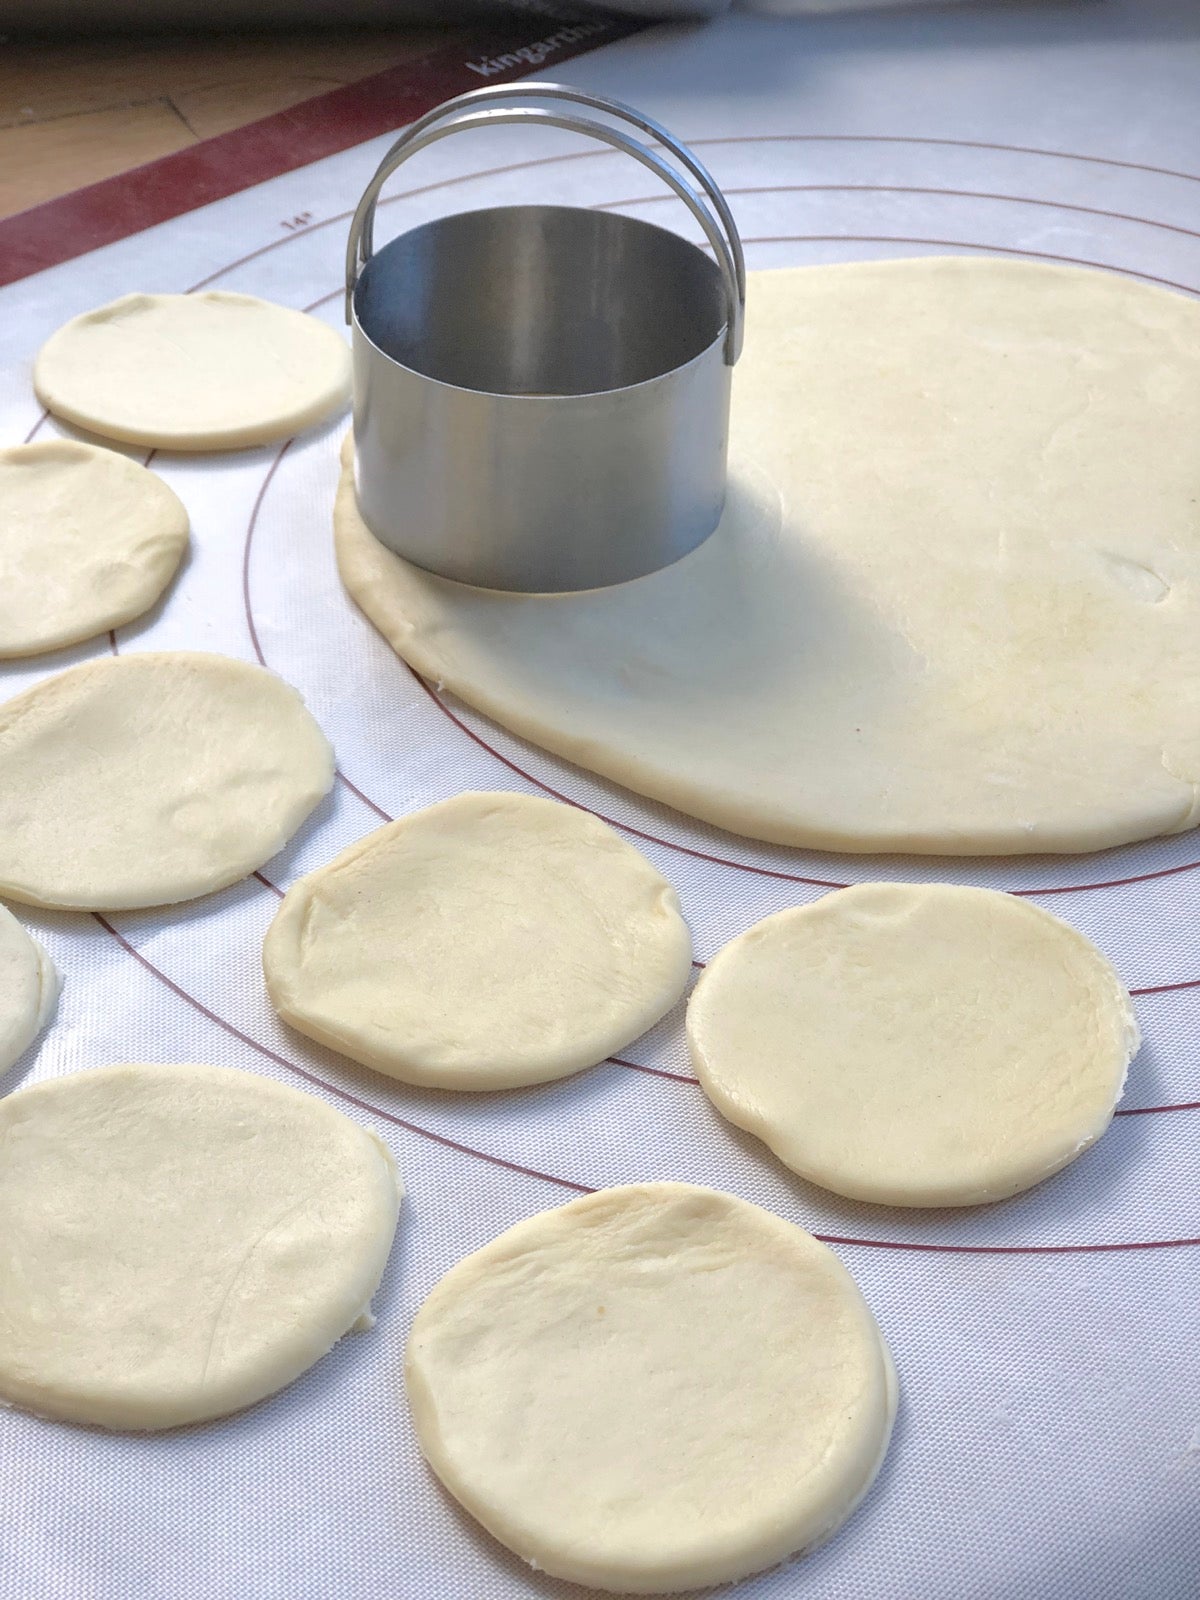 Rolled pierogi dough on a silicone mat being cut with a round biscuit cutter.